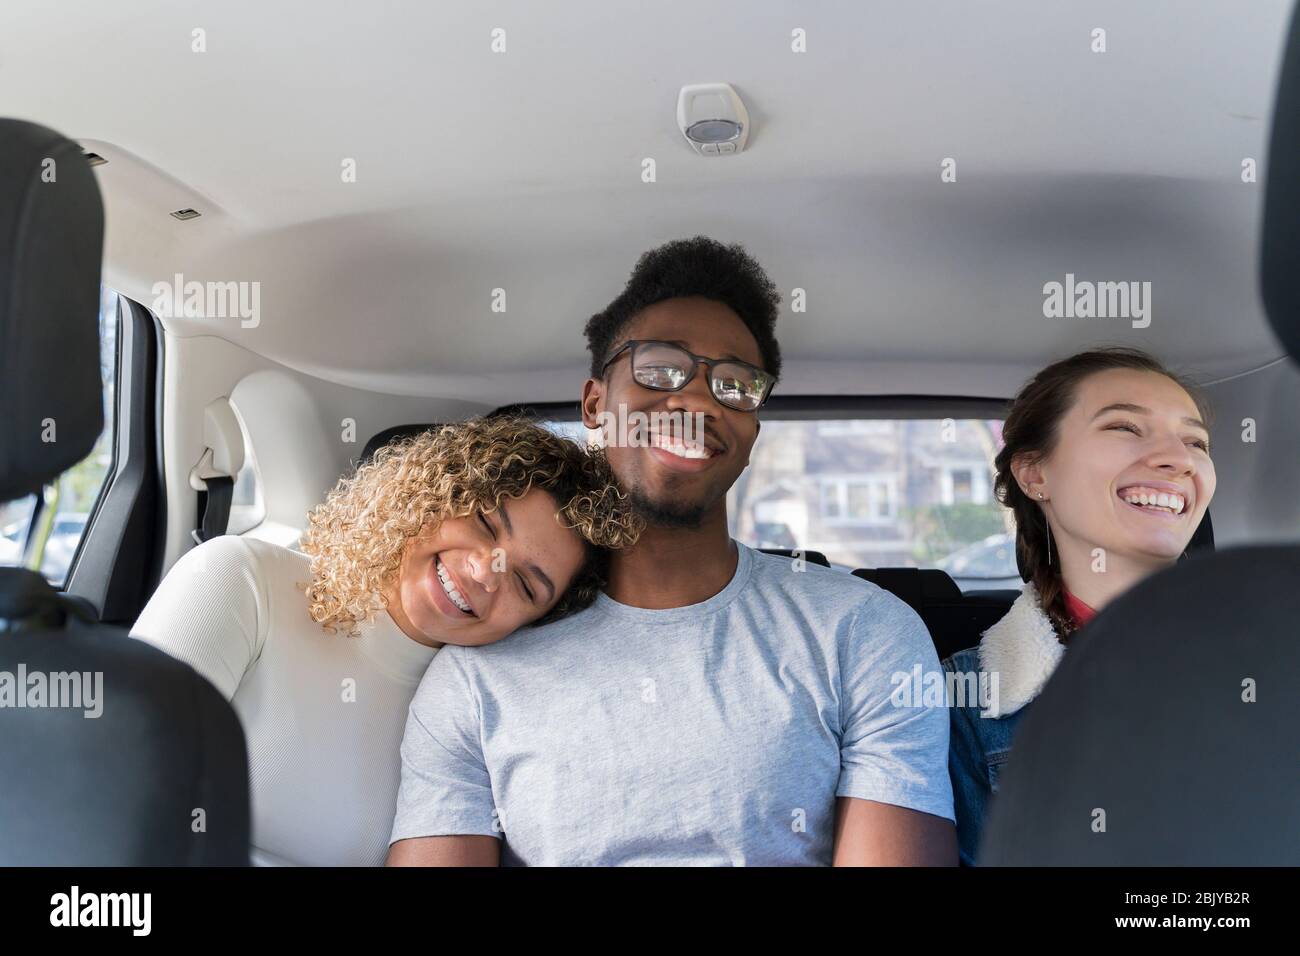 Friends on road trip togetherÂ Stock Photo